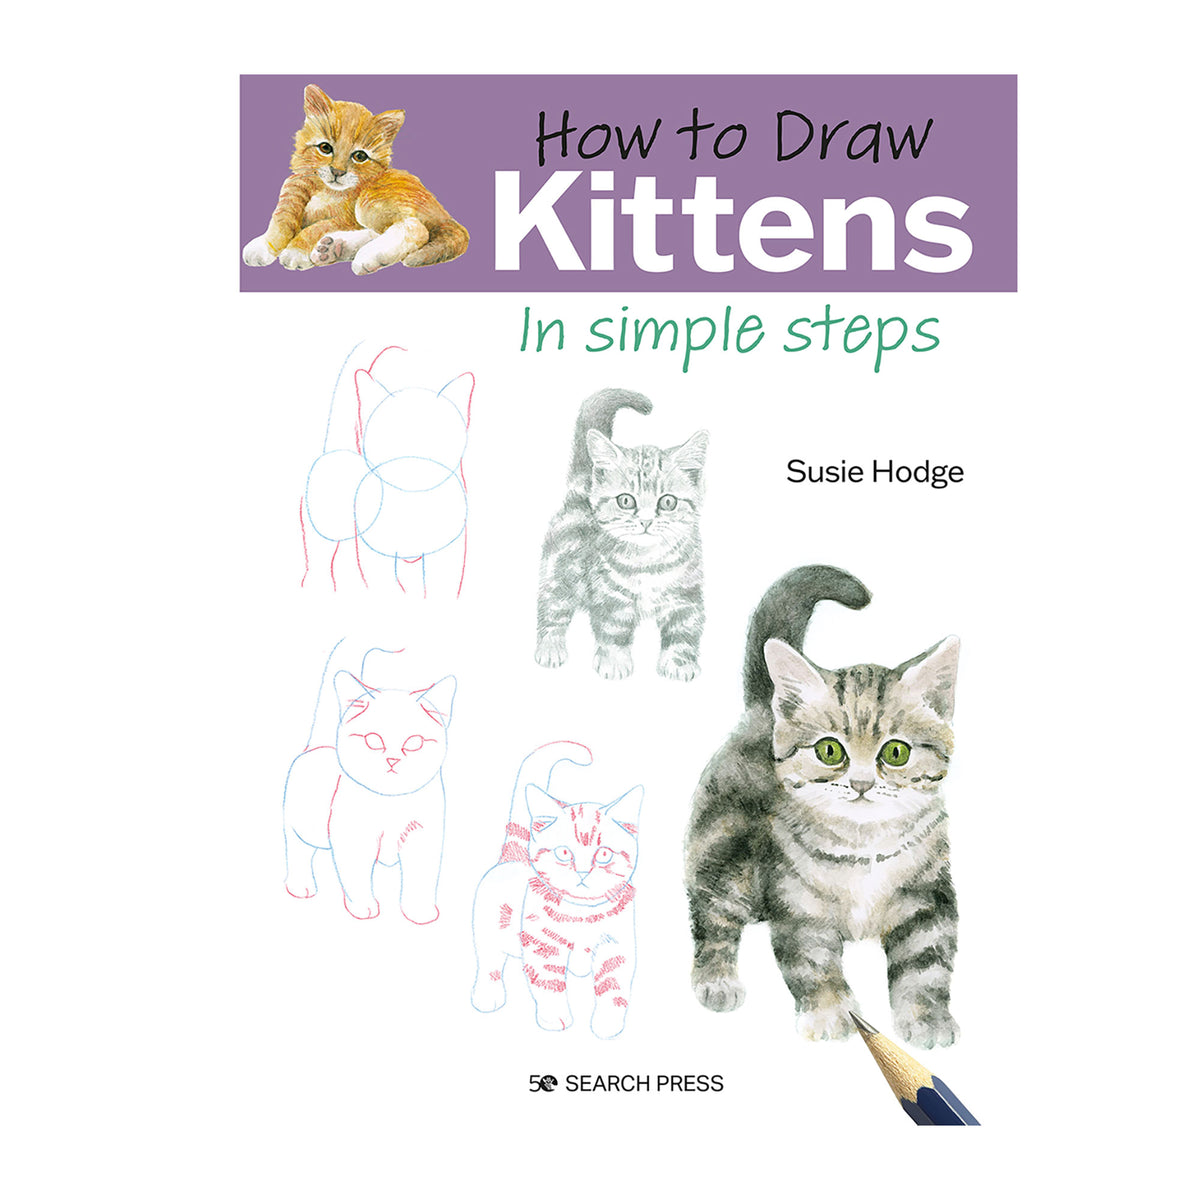 How to Draw: Kittens in Simple Steps - S. Hodge